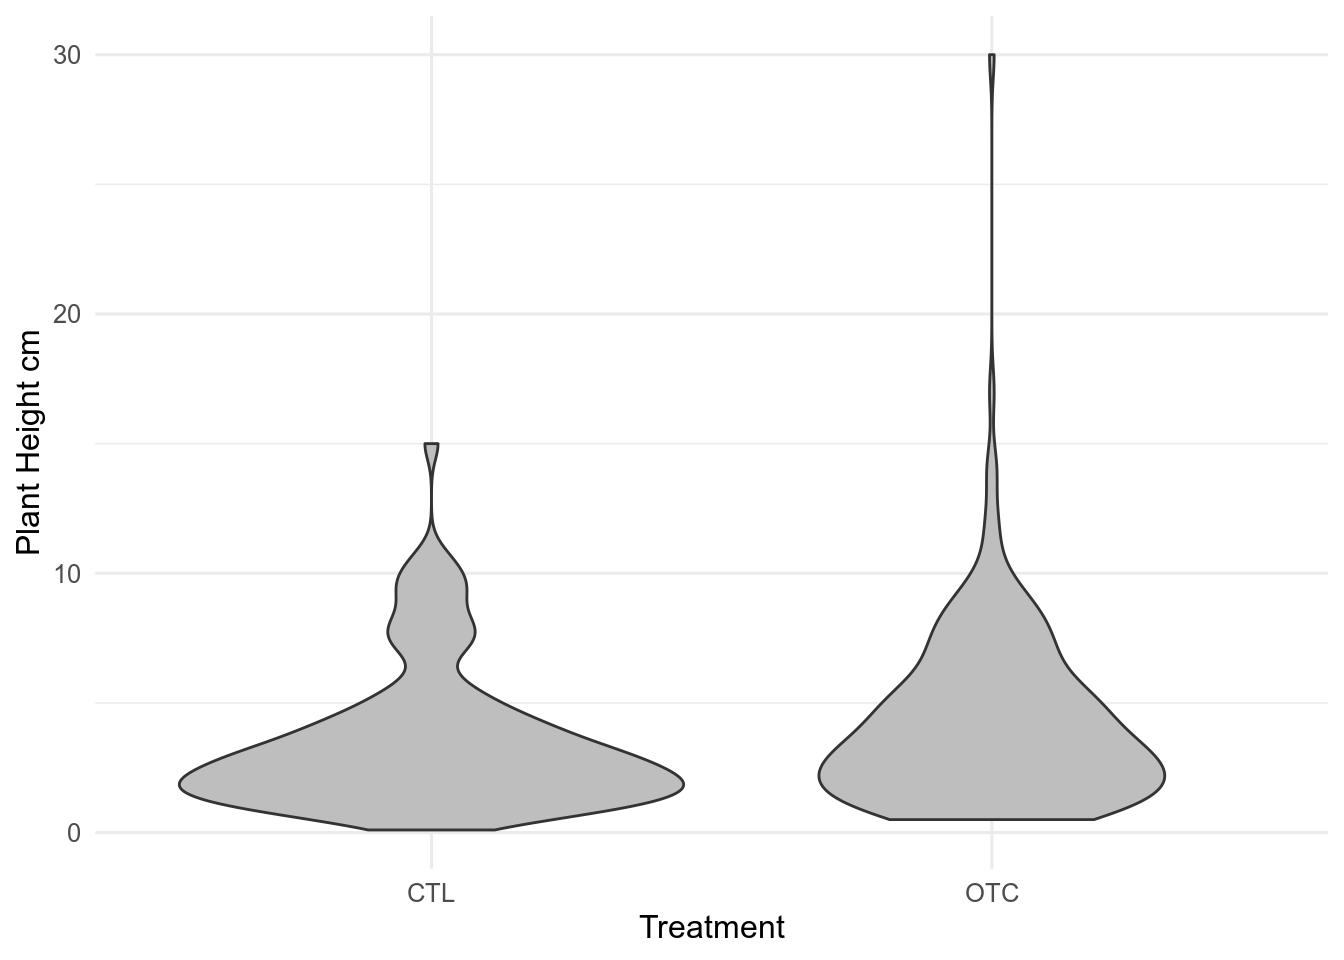 Violin plot of plant heights made with ggplot2